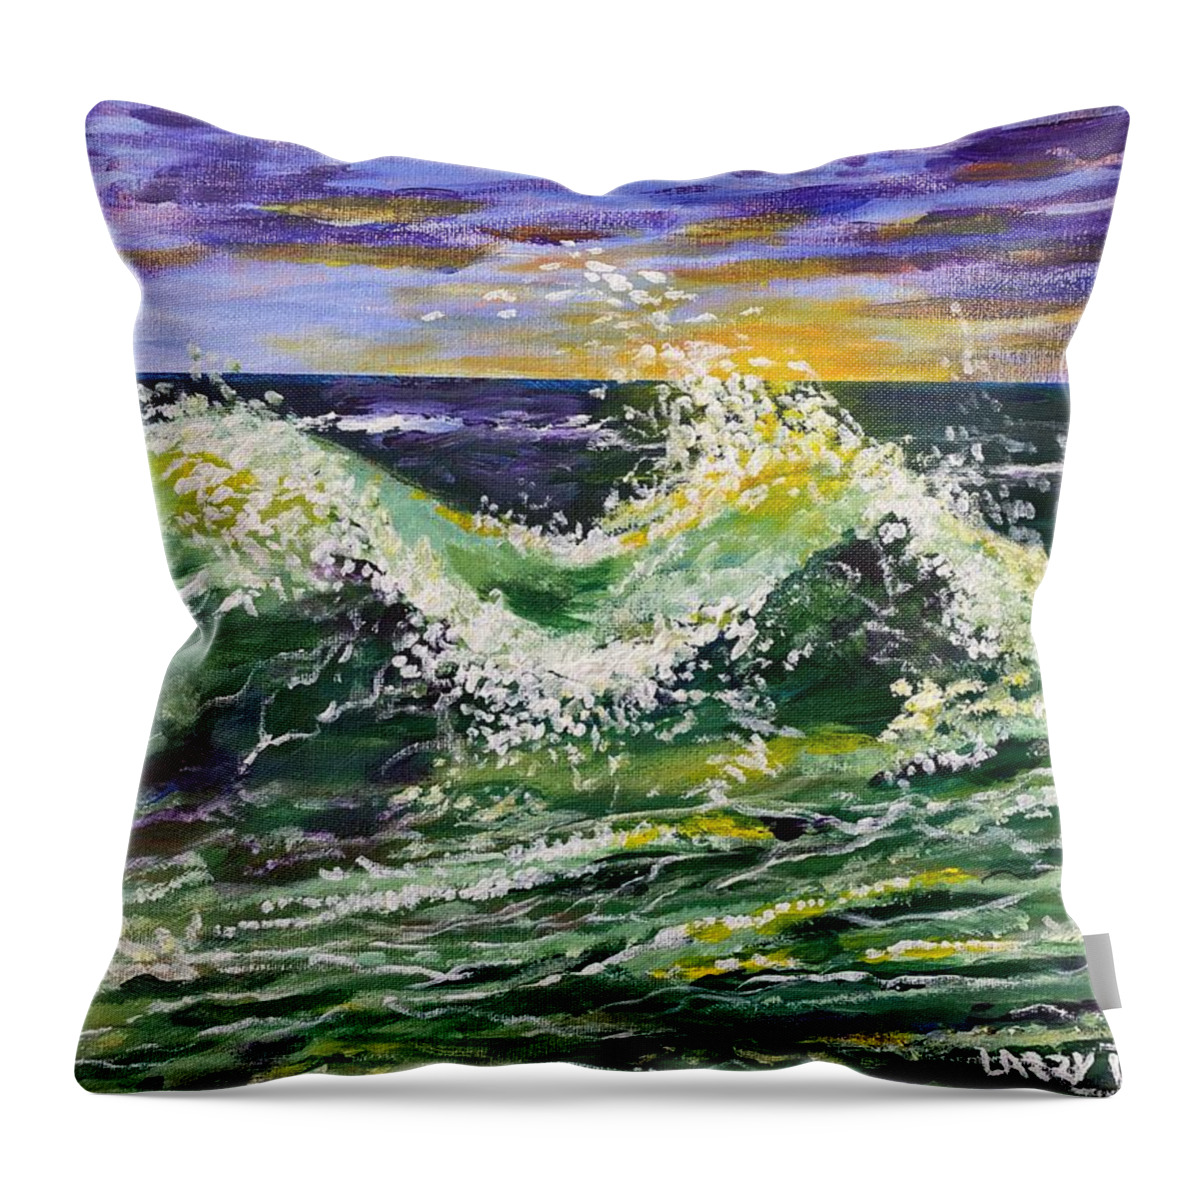 Seascape Throw Pillow featuring the painting The Turbulent Sea #2 by Larry Whitler